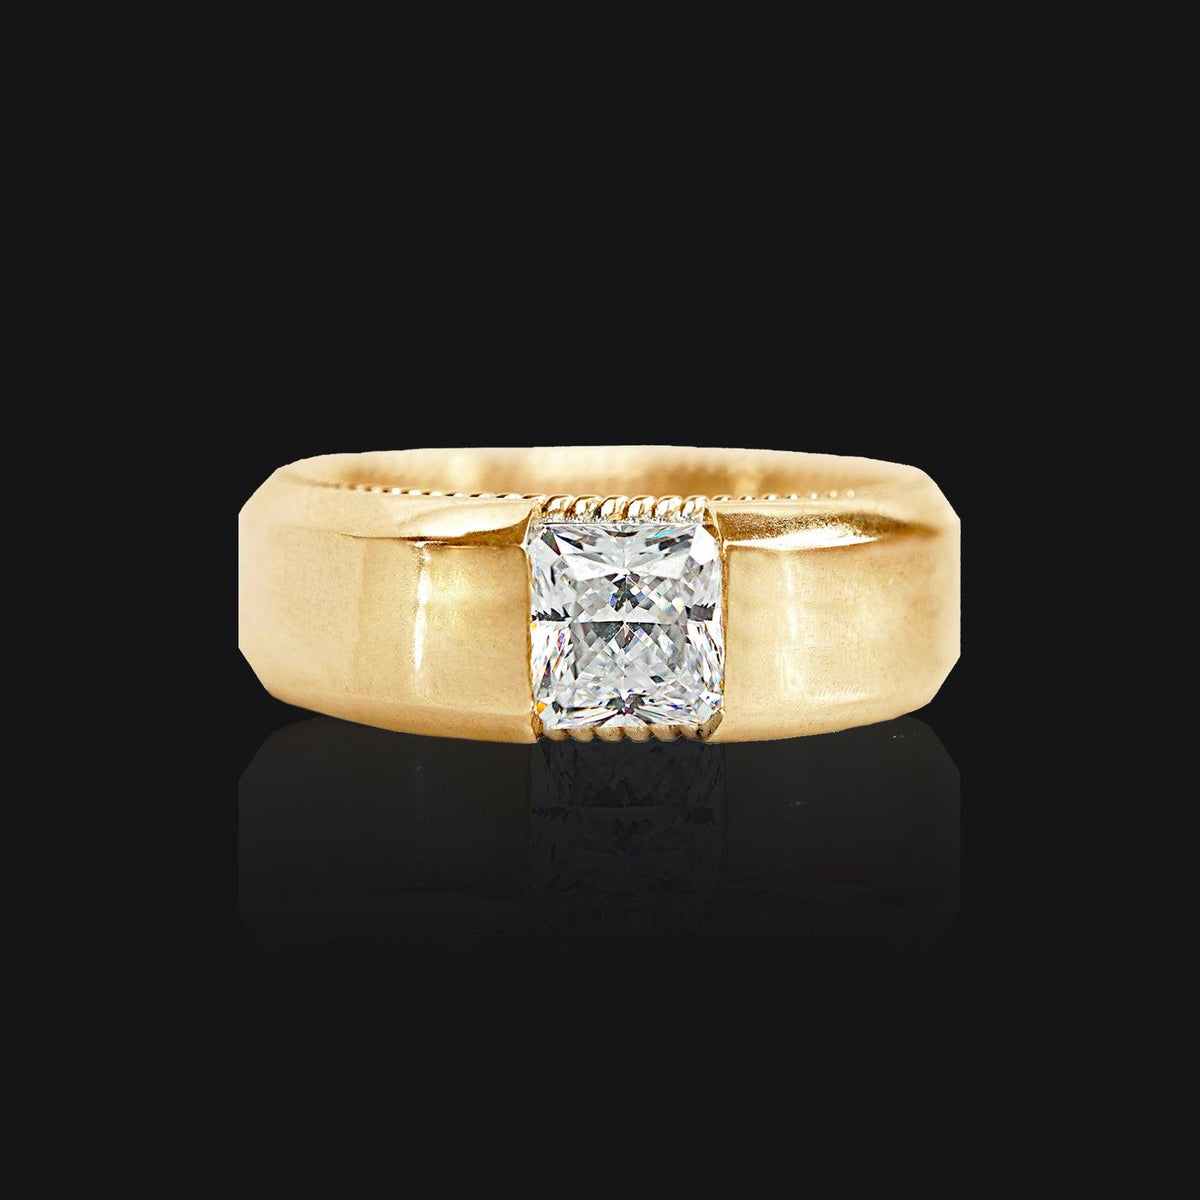 One Of A Kind: Diamond Bevel Ring in 14K Gold, 0.99ct